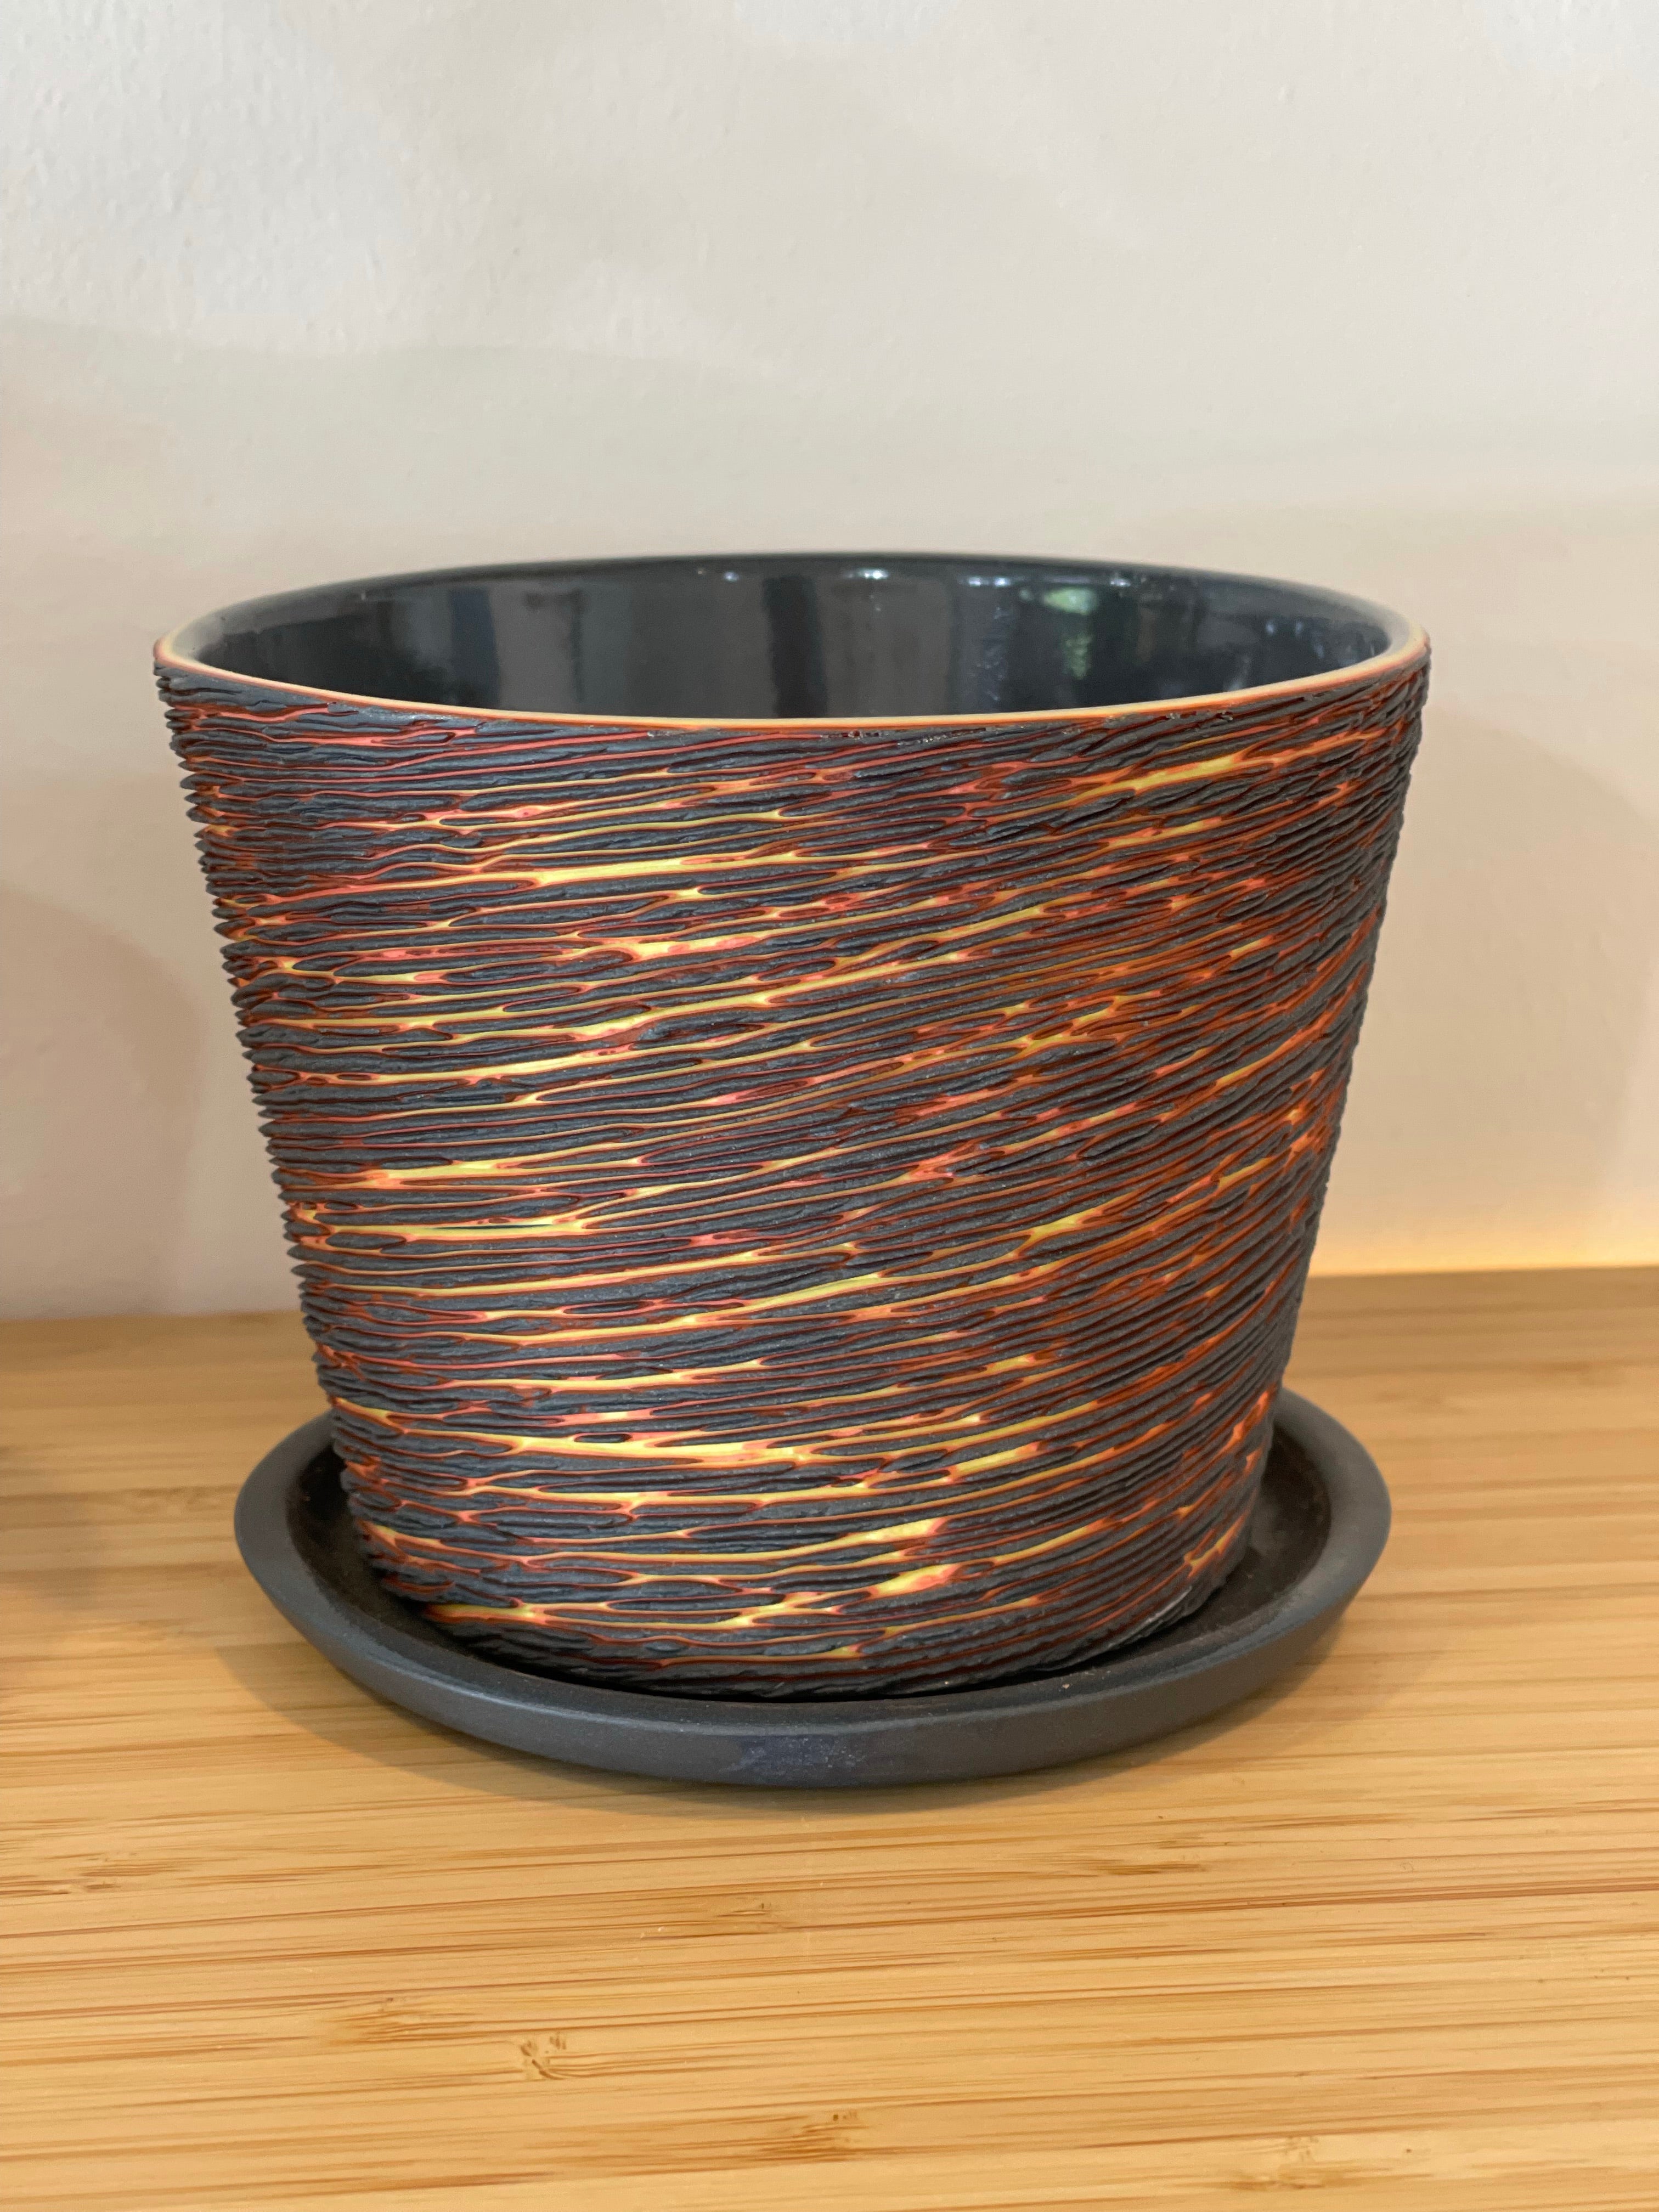 Lava Texture Planter 4 Layer *Preorder* ship in early-mid Feb '22